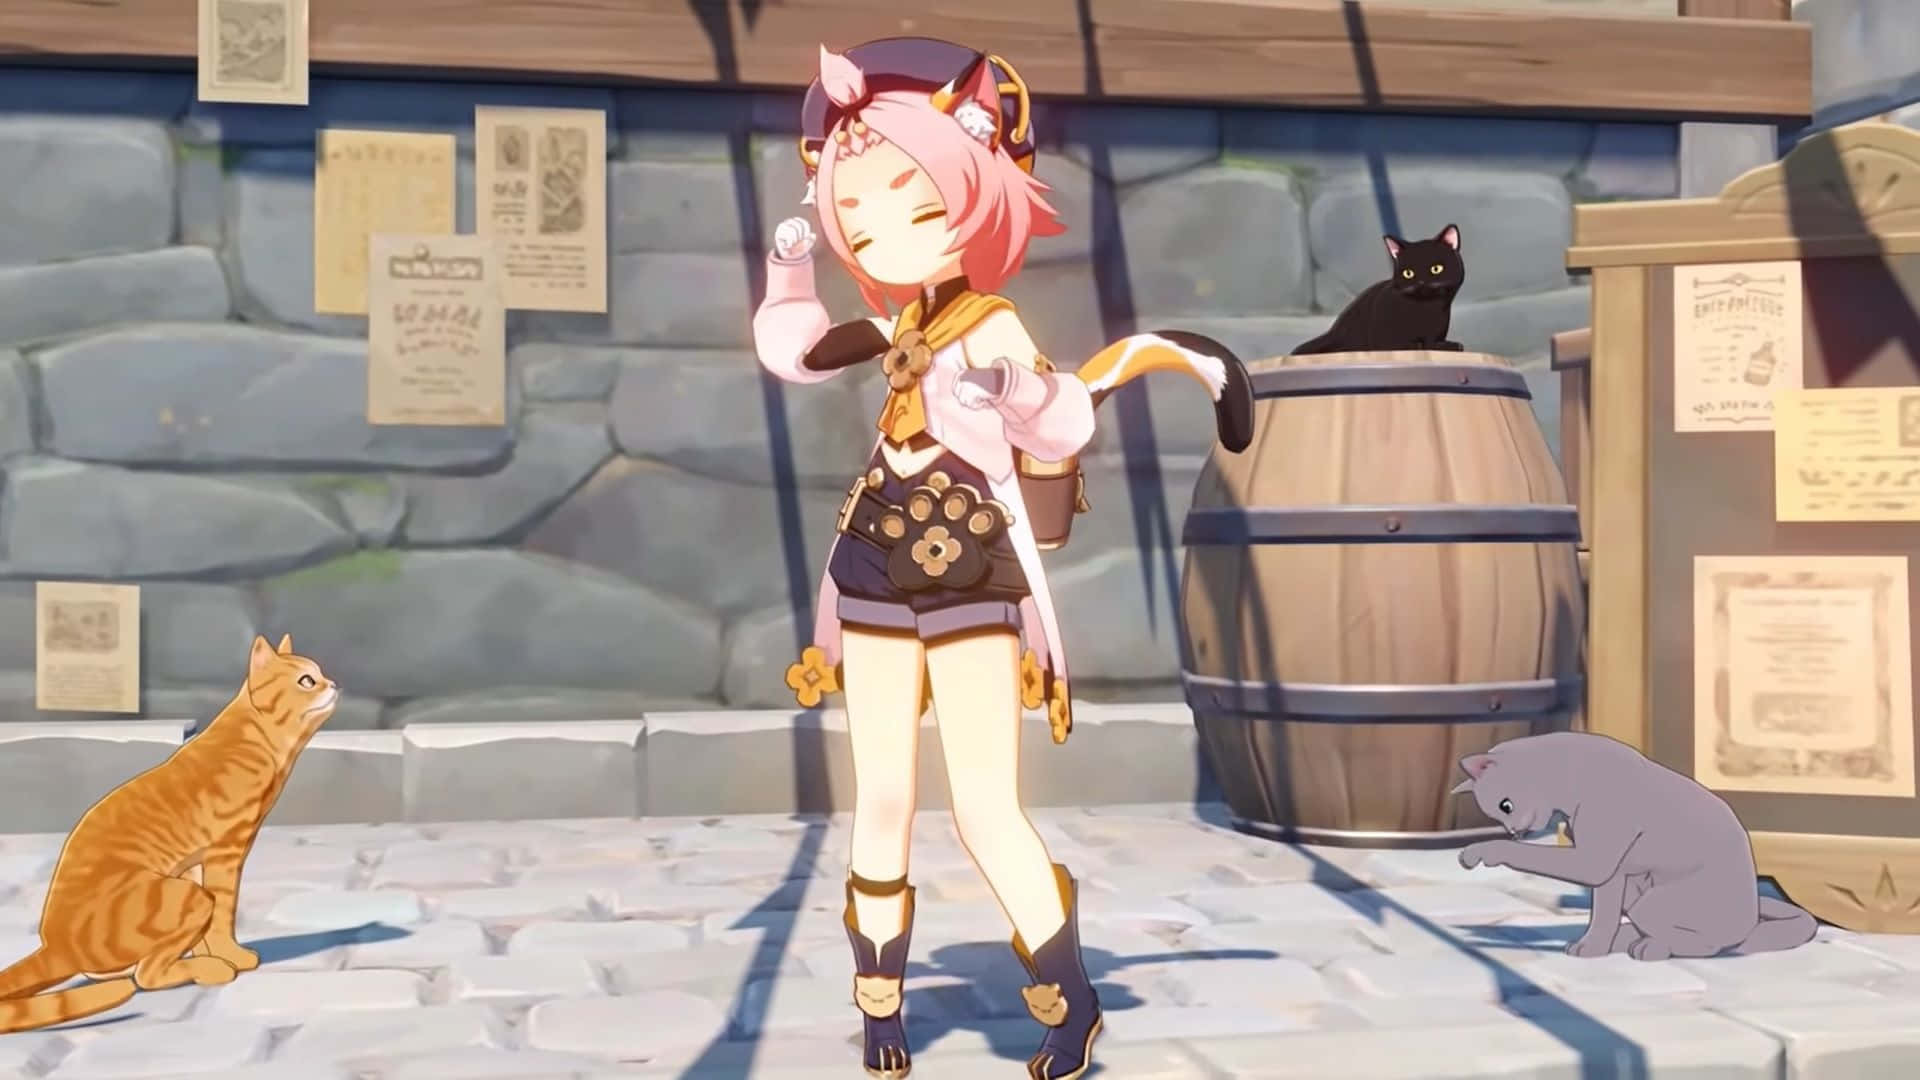 Genshin Impact's Diona - The Charming Cat-themed Bartender Wallpaper